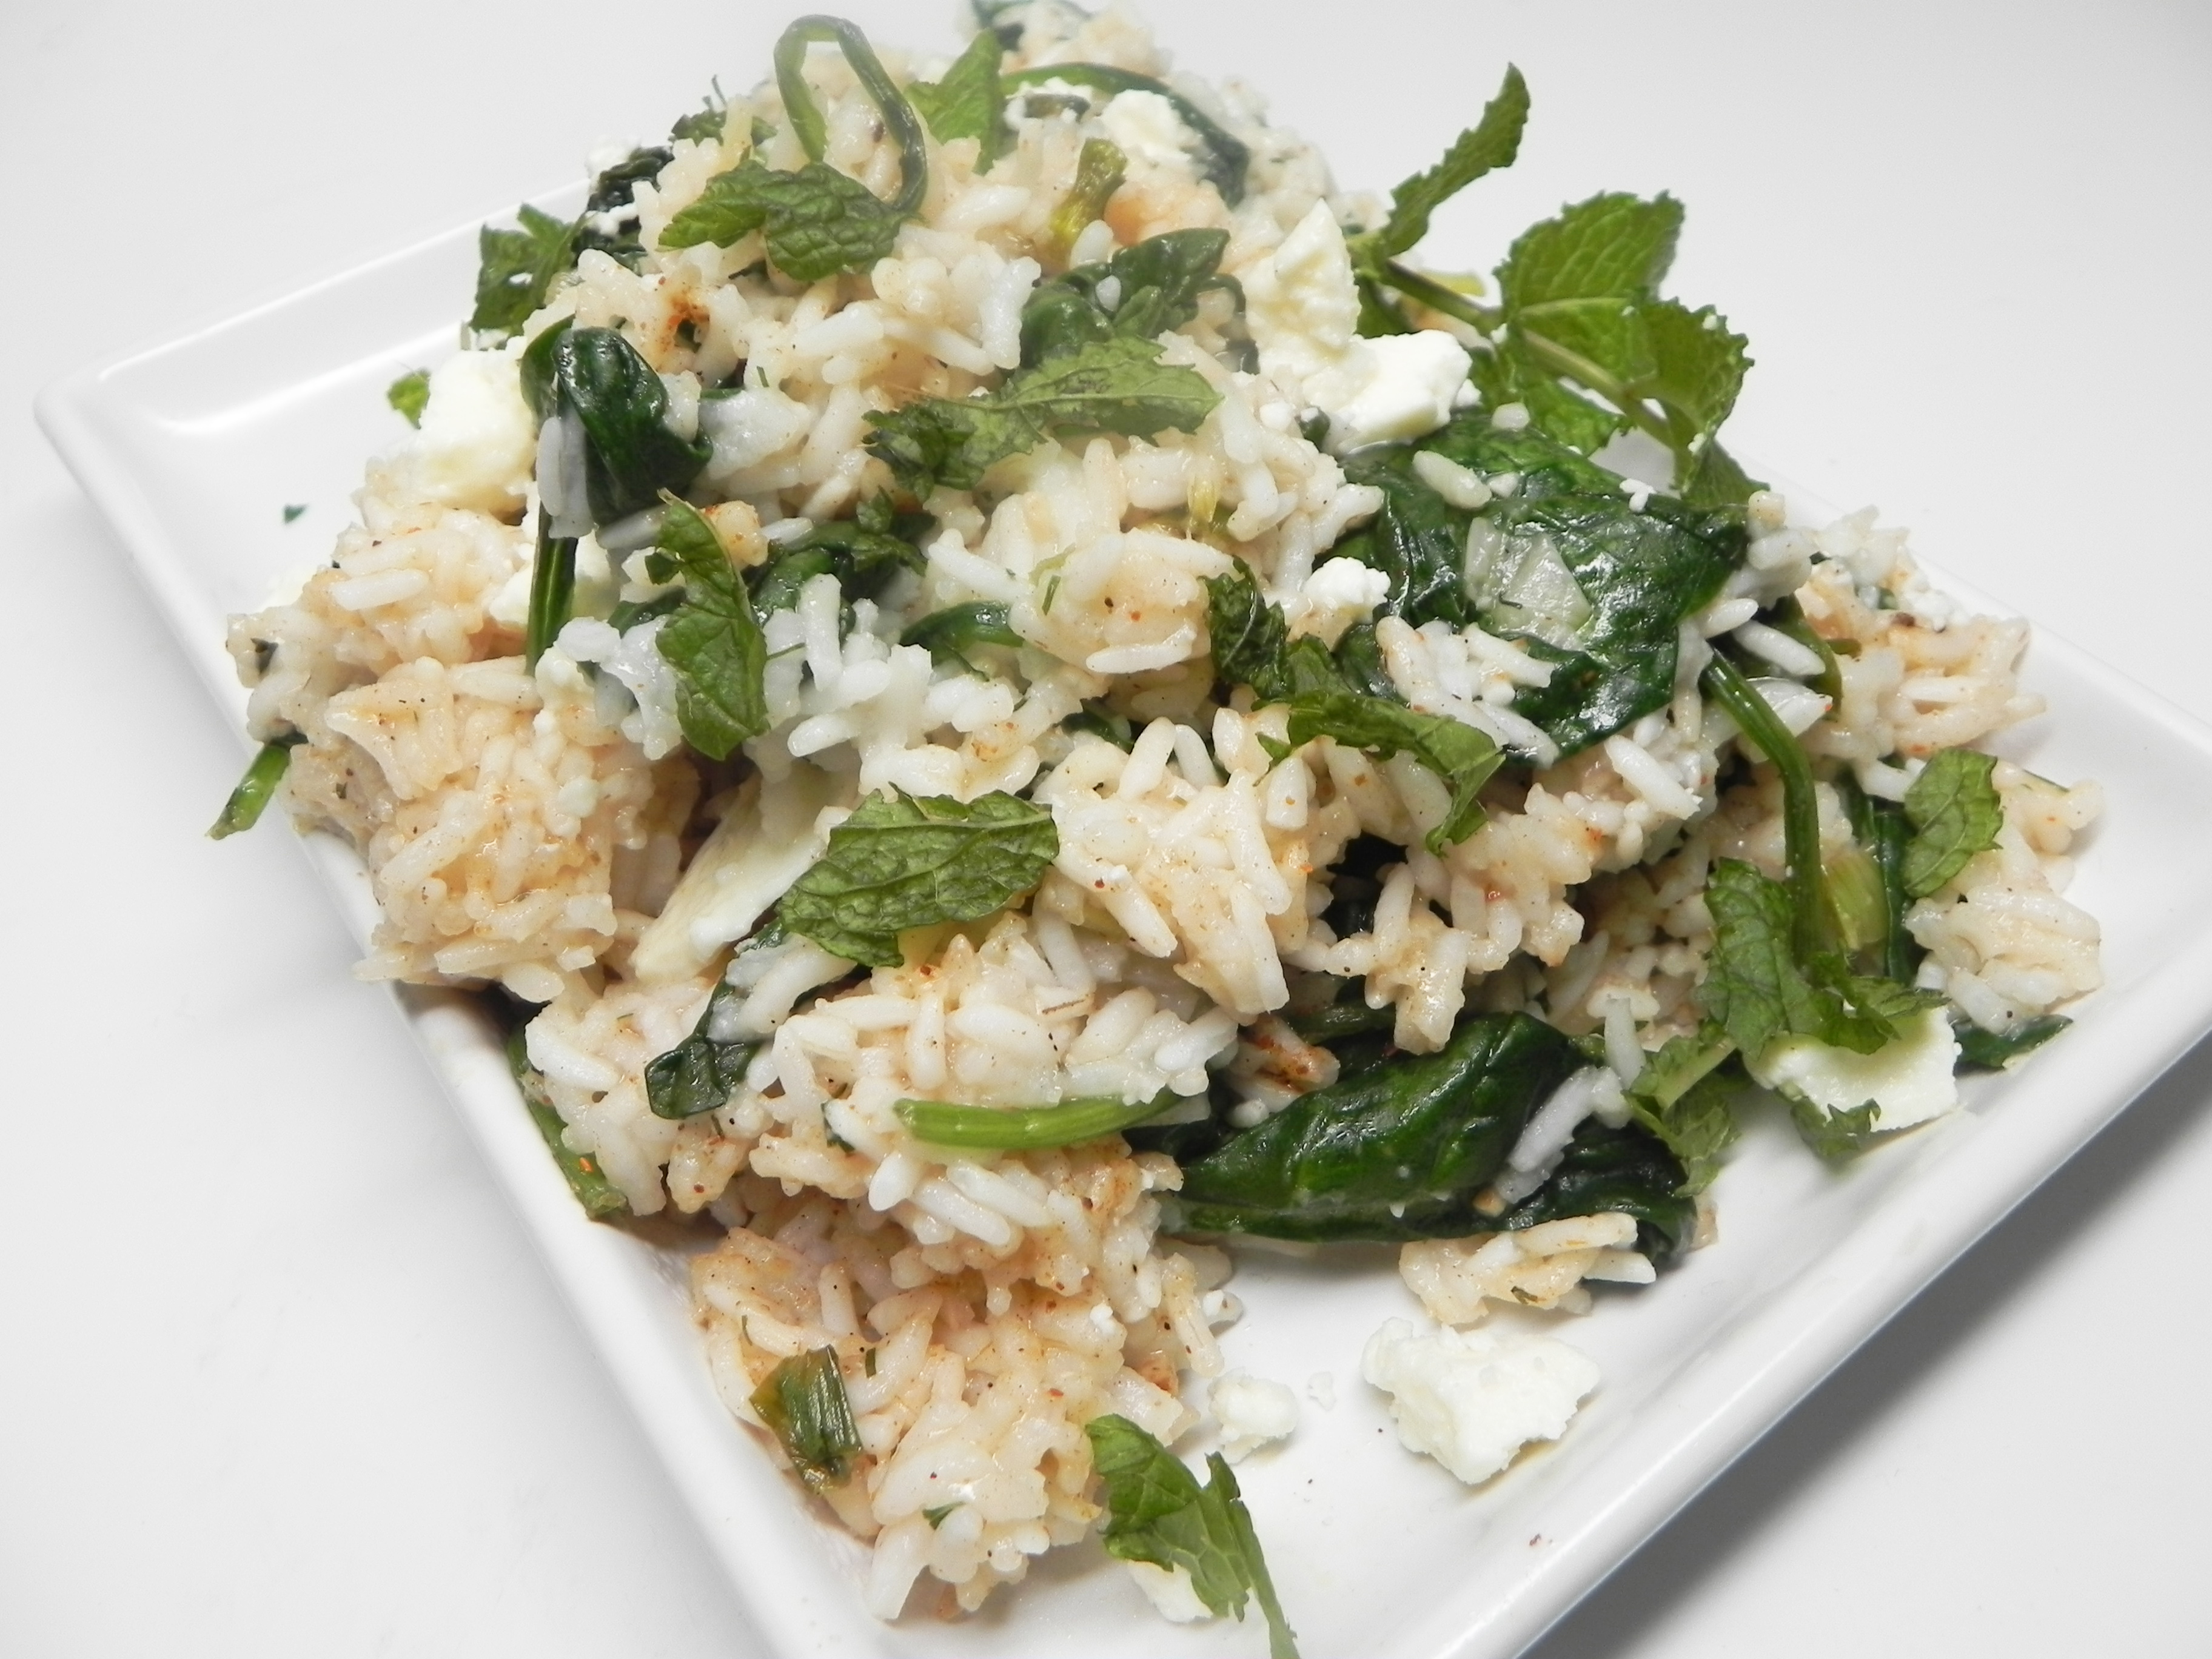 Delicious Spinach Rice with Feta